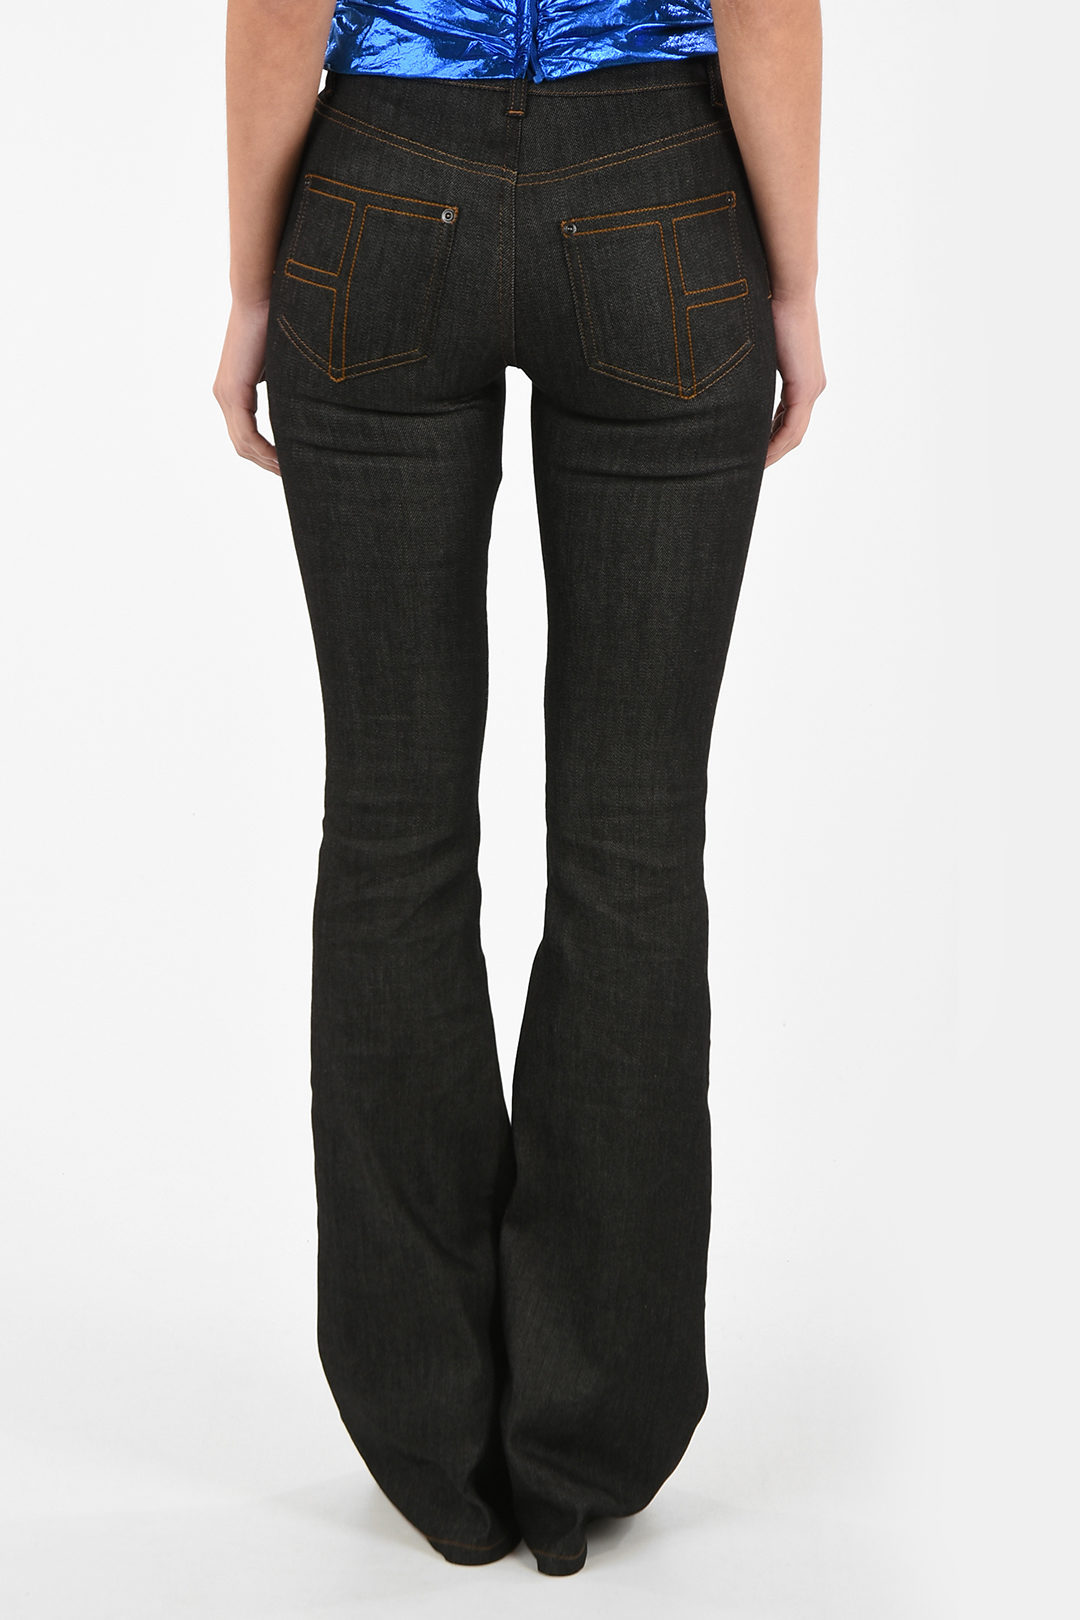 Tom Ford High-Rise Bootcut jeans women - Glamood Outlet